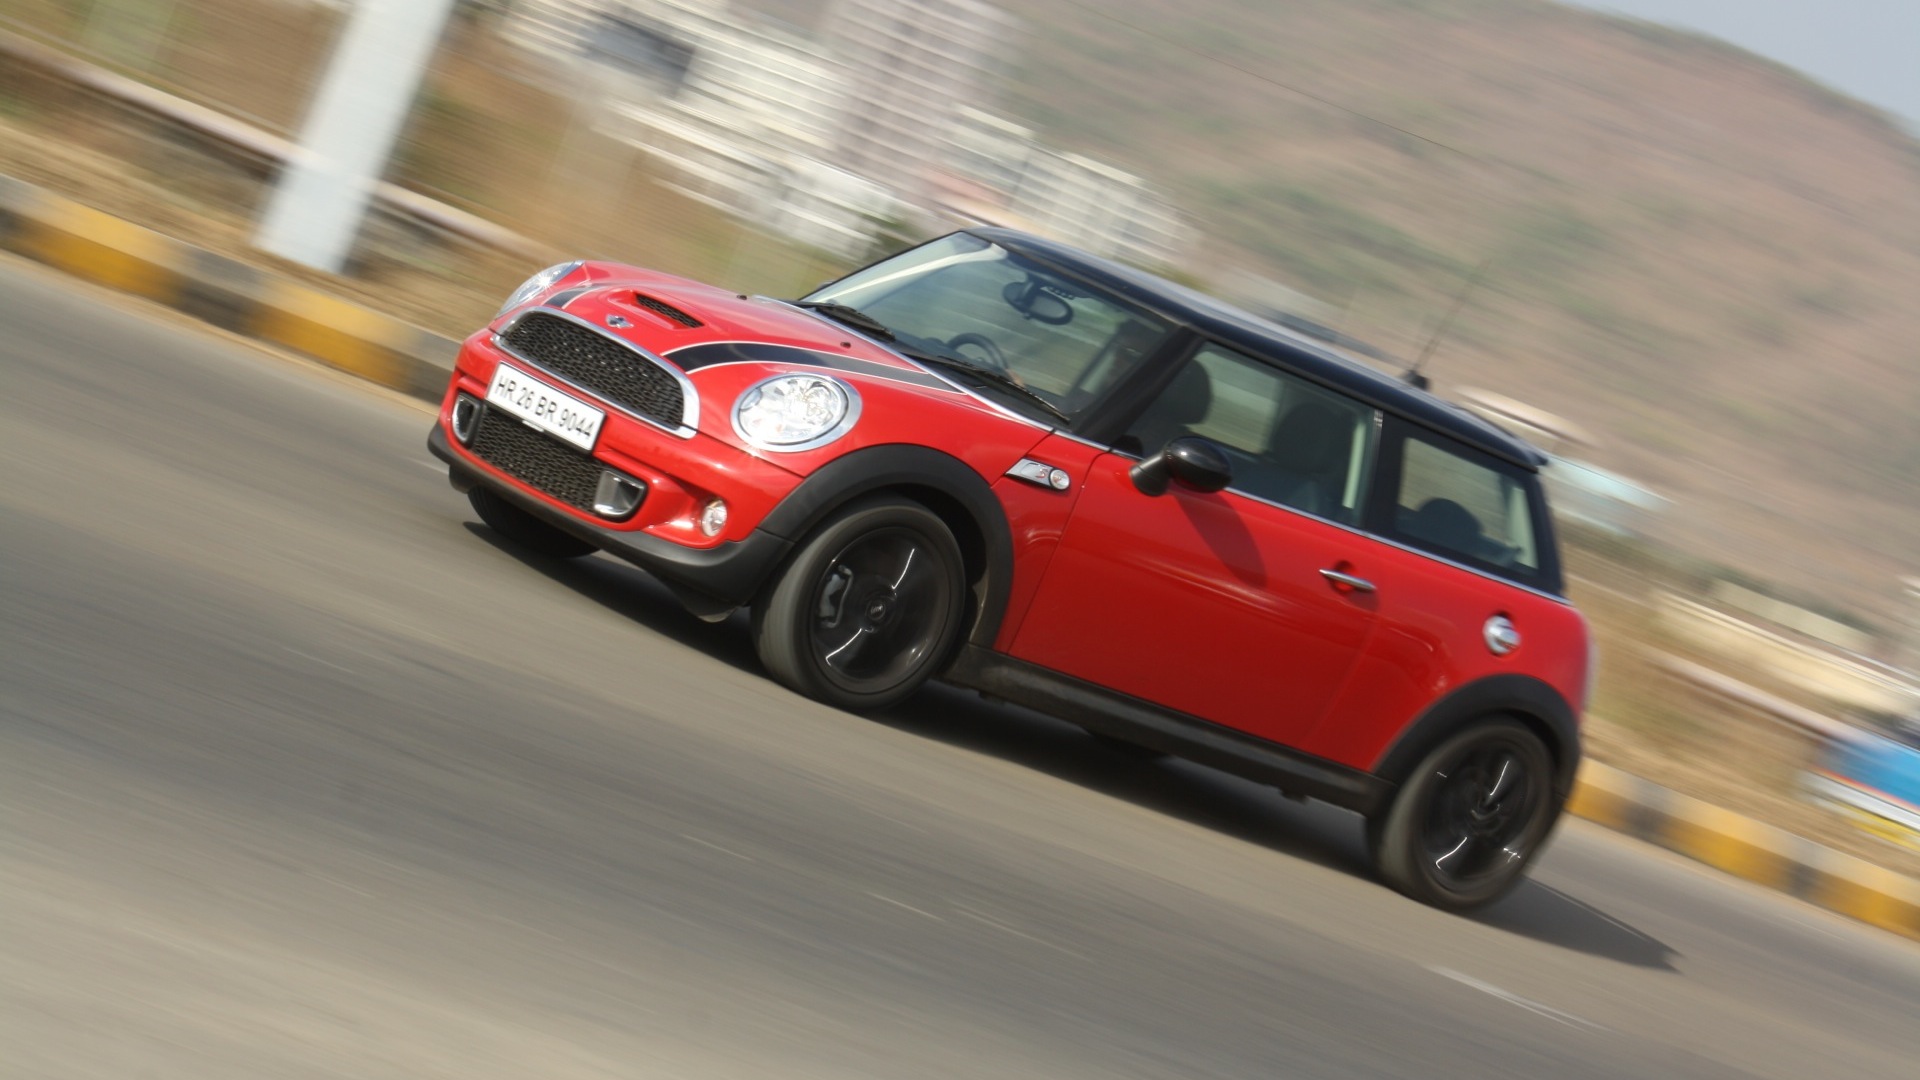 Mini Cooper 2012 S - Price in India, Mileage, Reviews, Colours,  Specification, Images - Overdrive